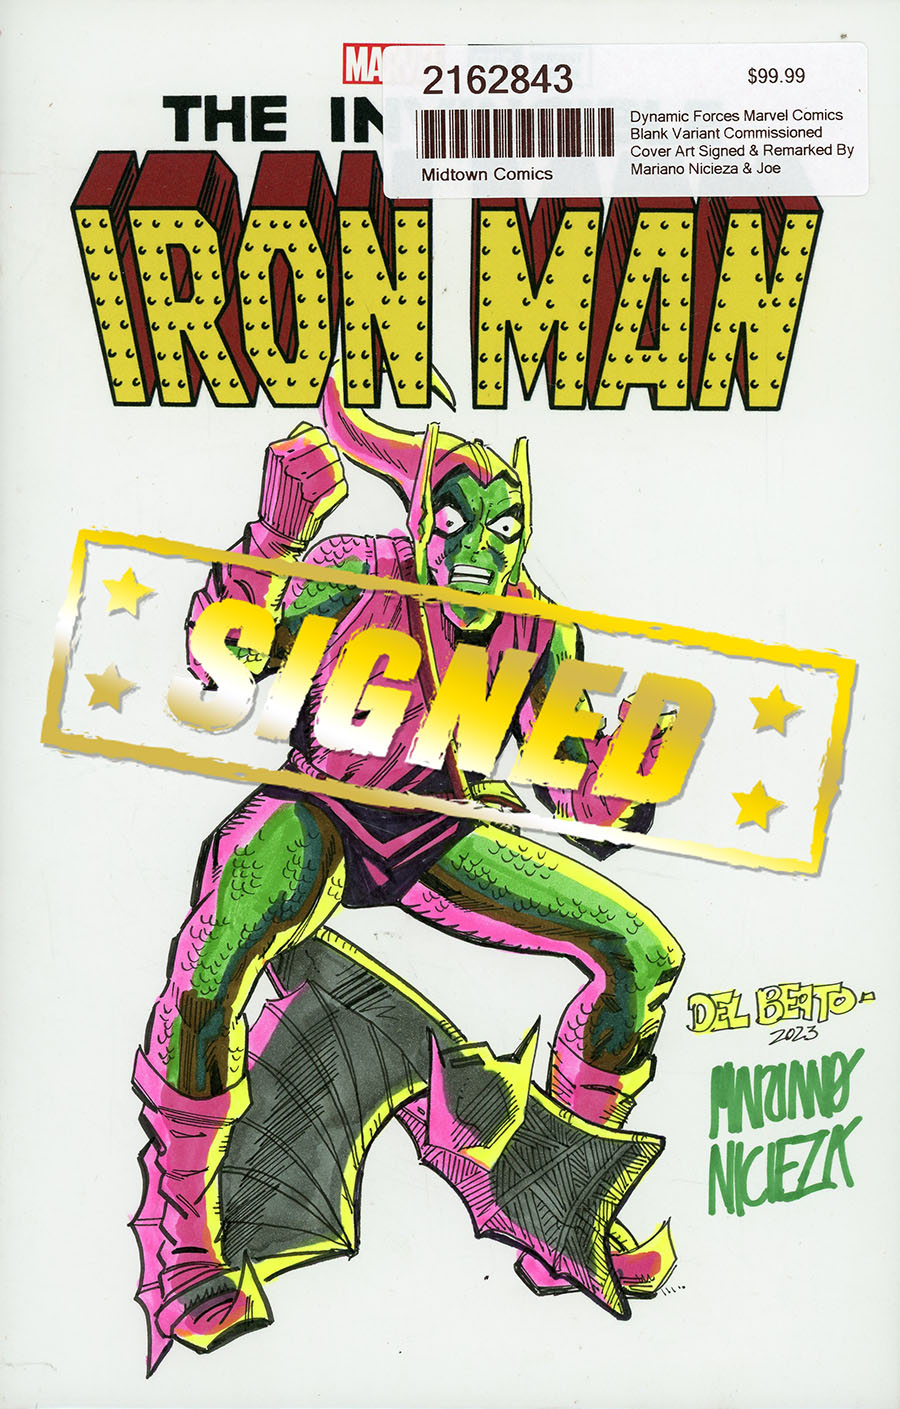 Dynamic Forces Marvel Comics Blank Variant Commissioned Cover Art Signed & Remarked By Mariano Nicieza & Joe Delbeato With A Green Goblin Hand-Drawn S